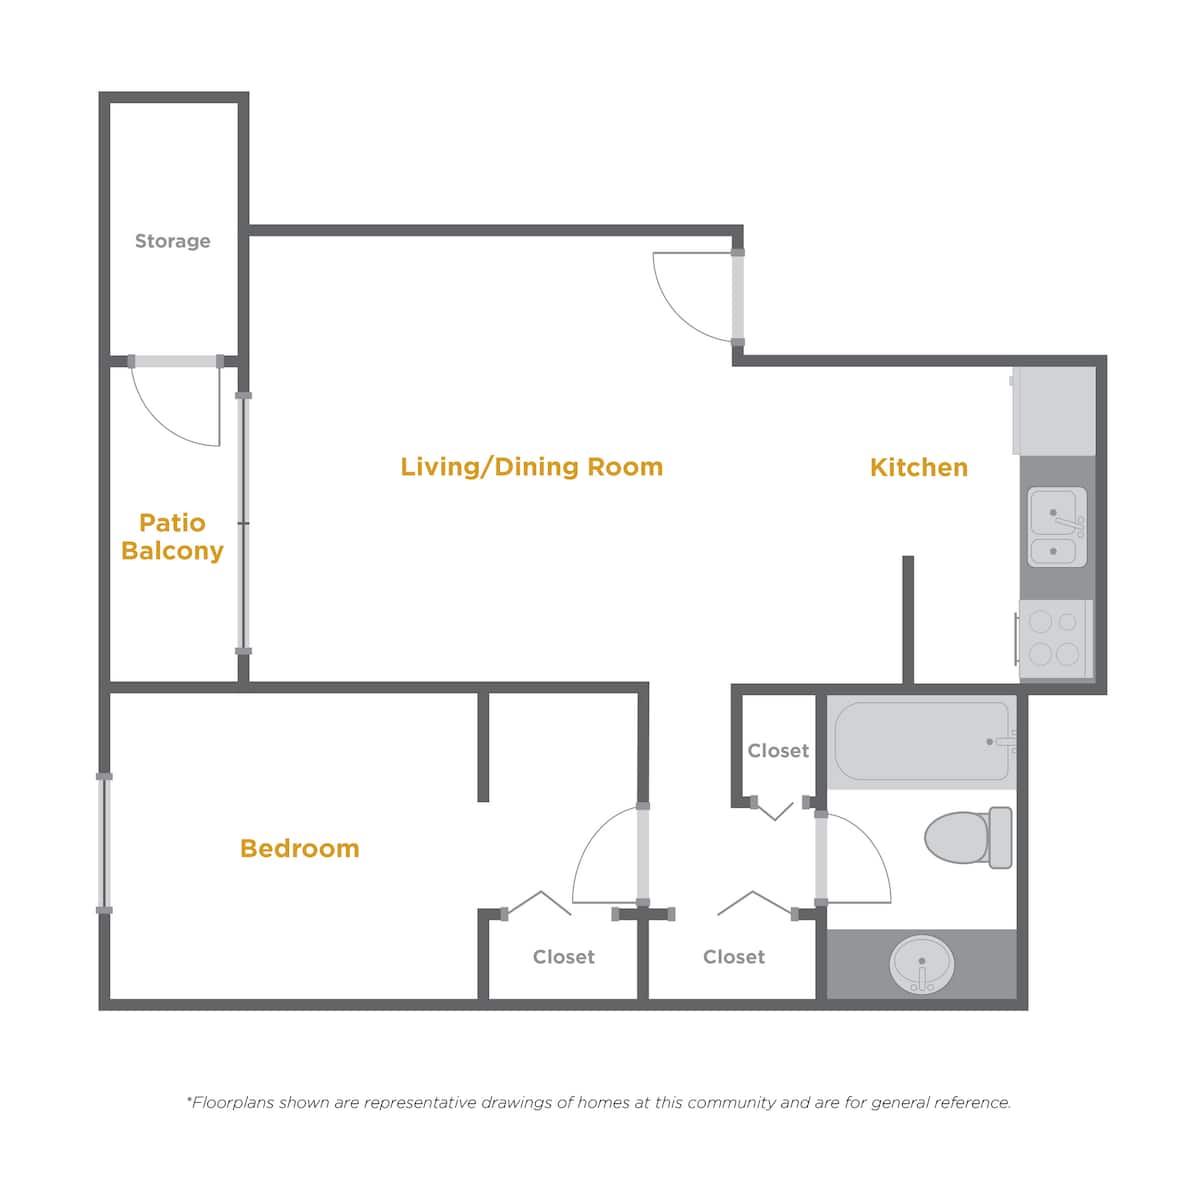 Floorplan diagram for a1dh, showing 1 bedroom